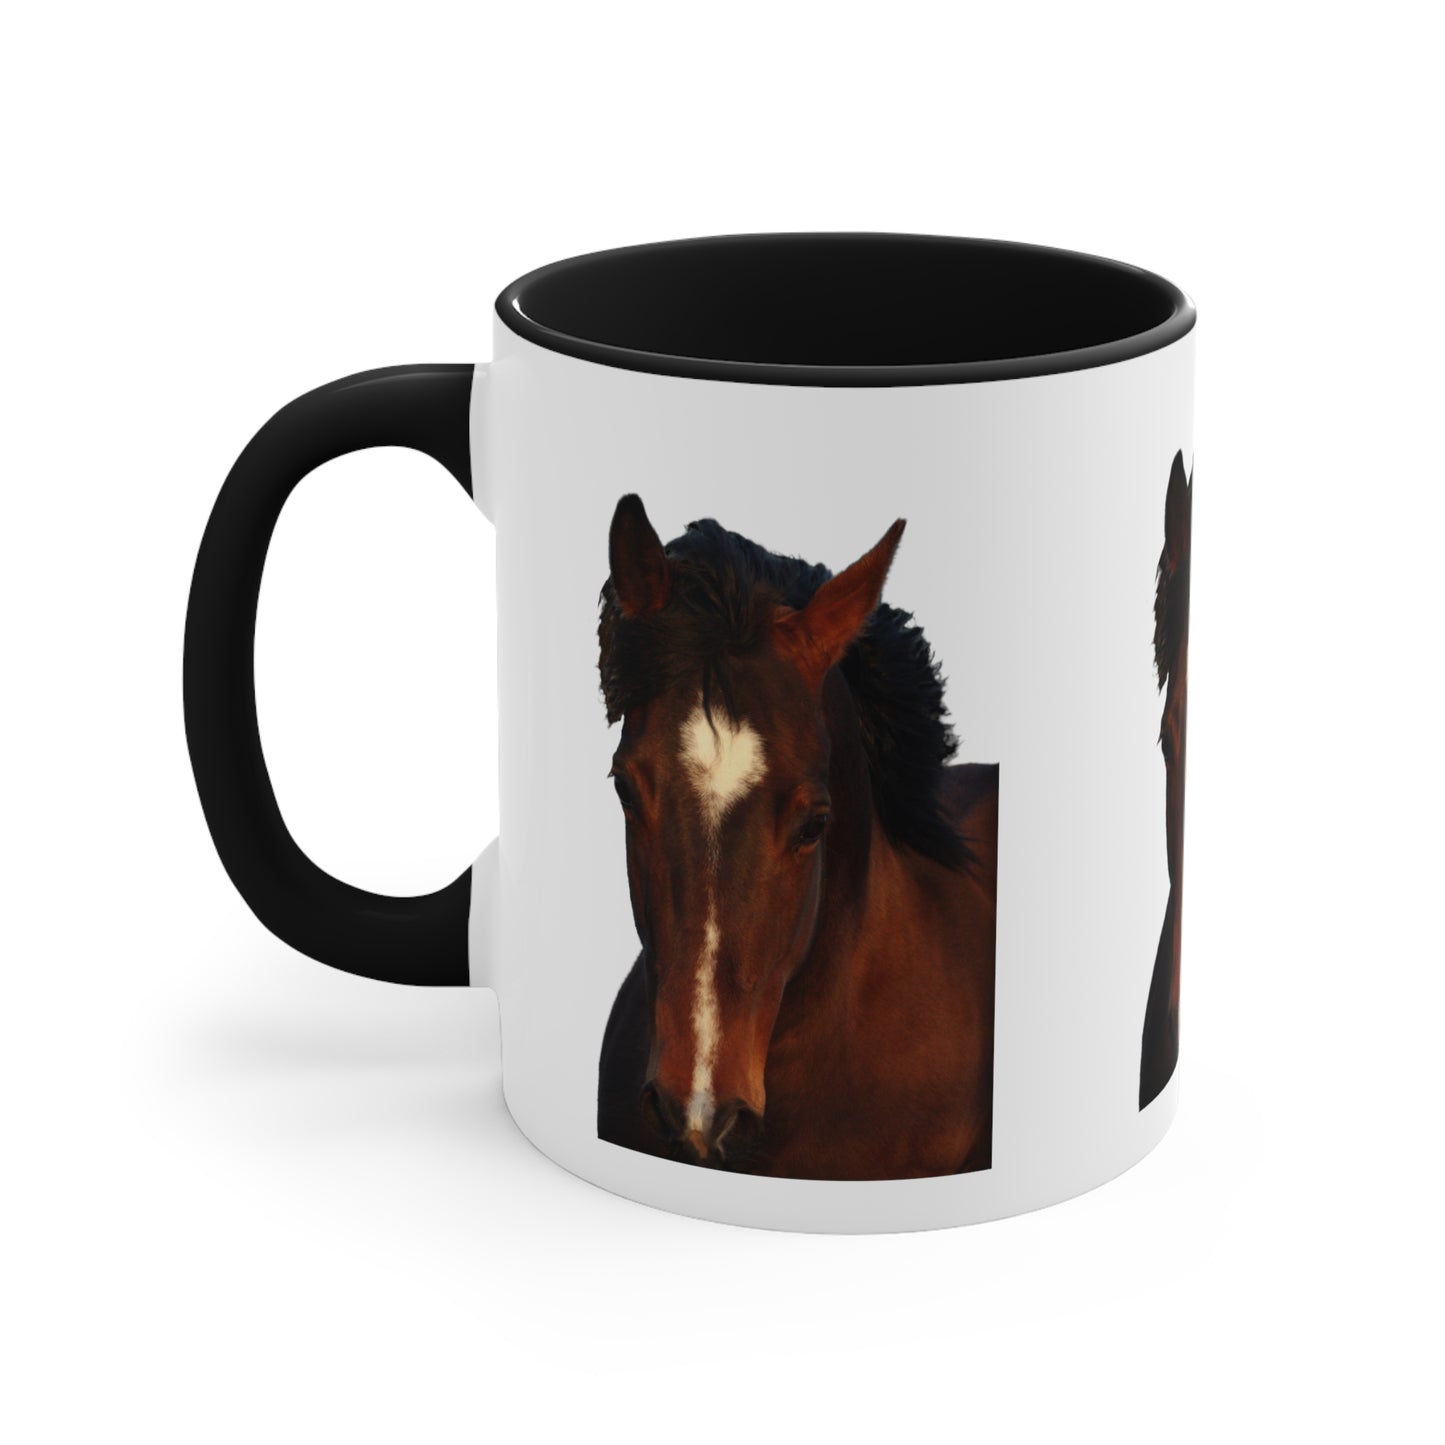 The Heart of the Horse     Quarter Horse      Accent Coffee Mug, 11oz